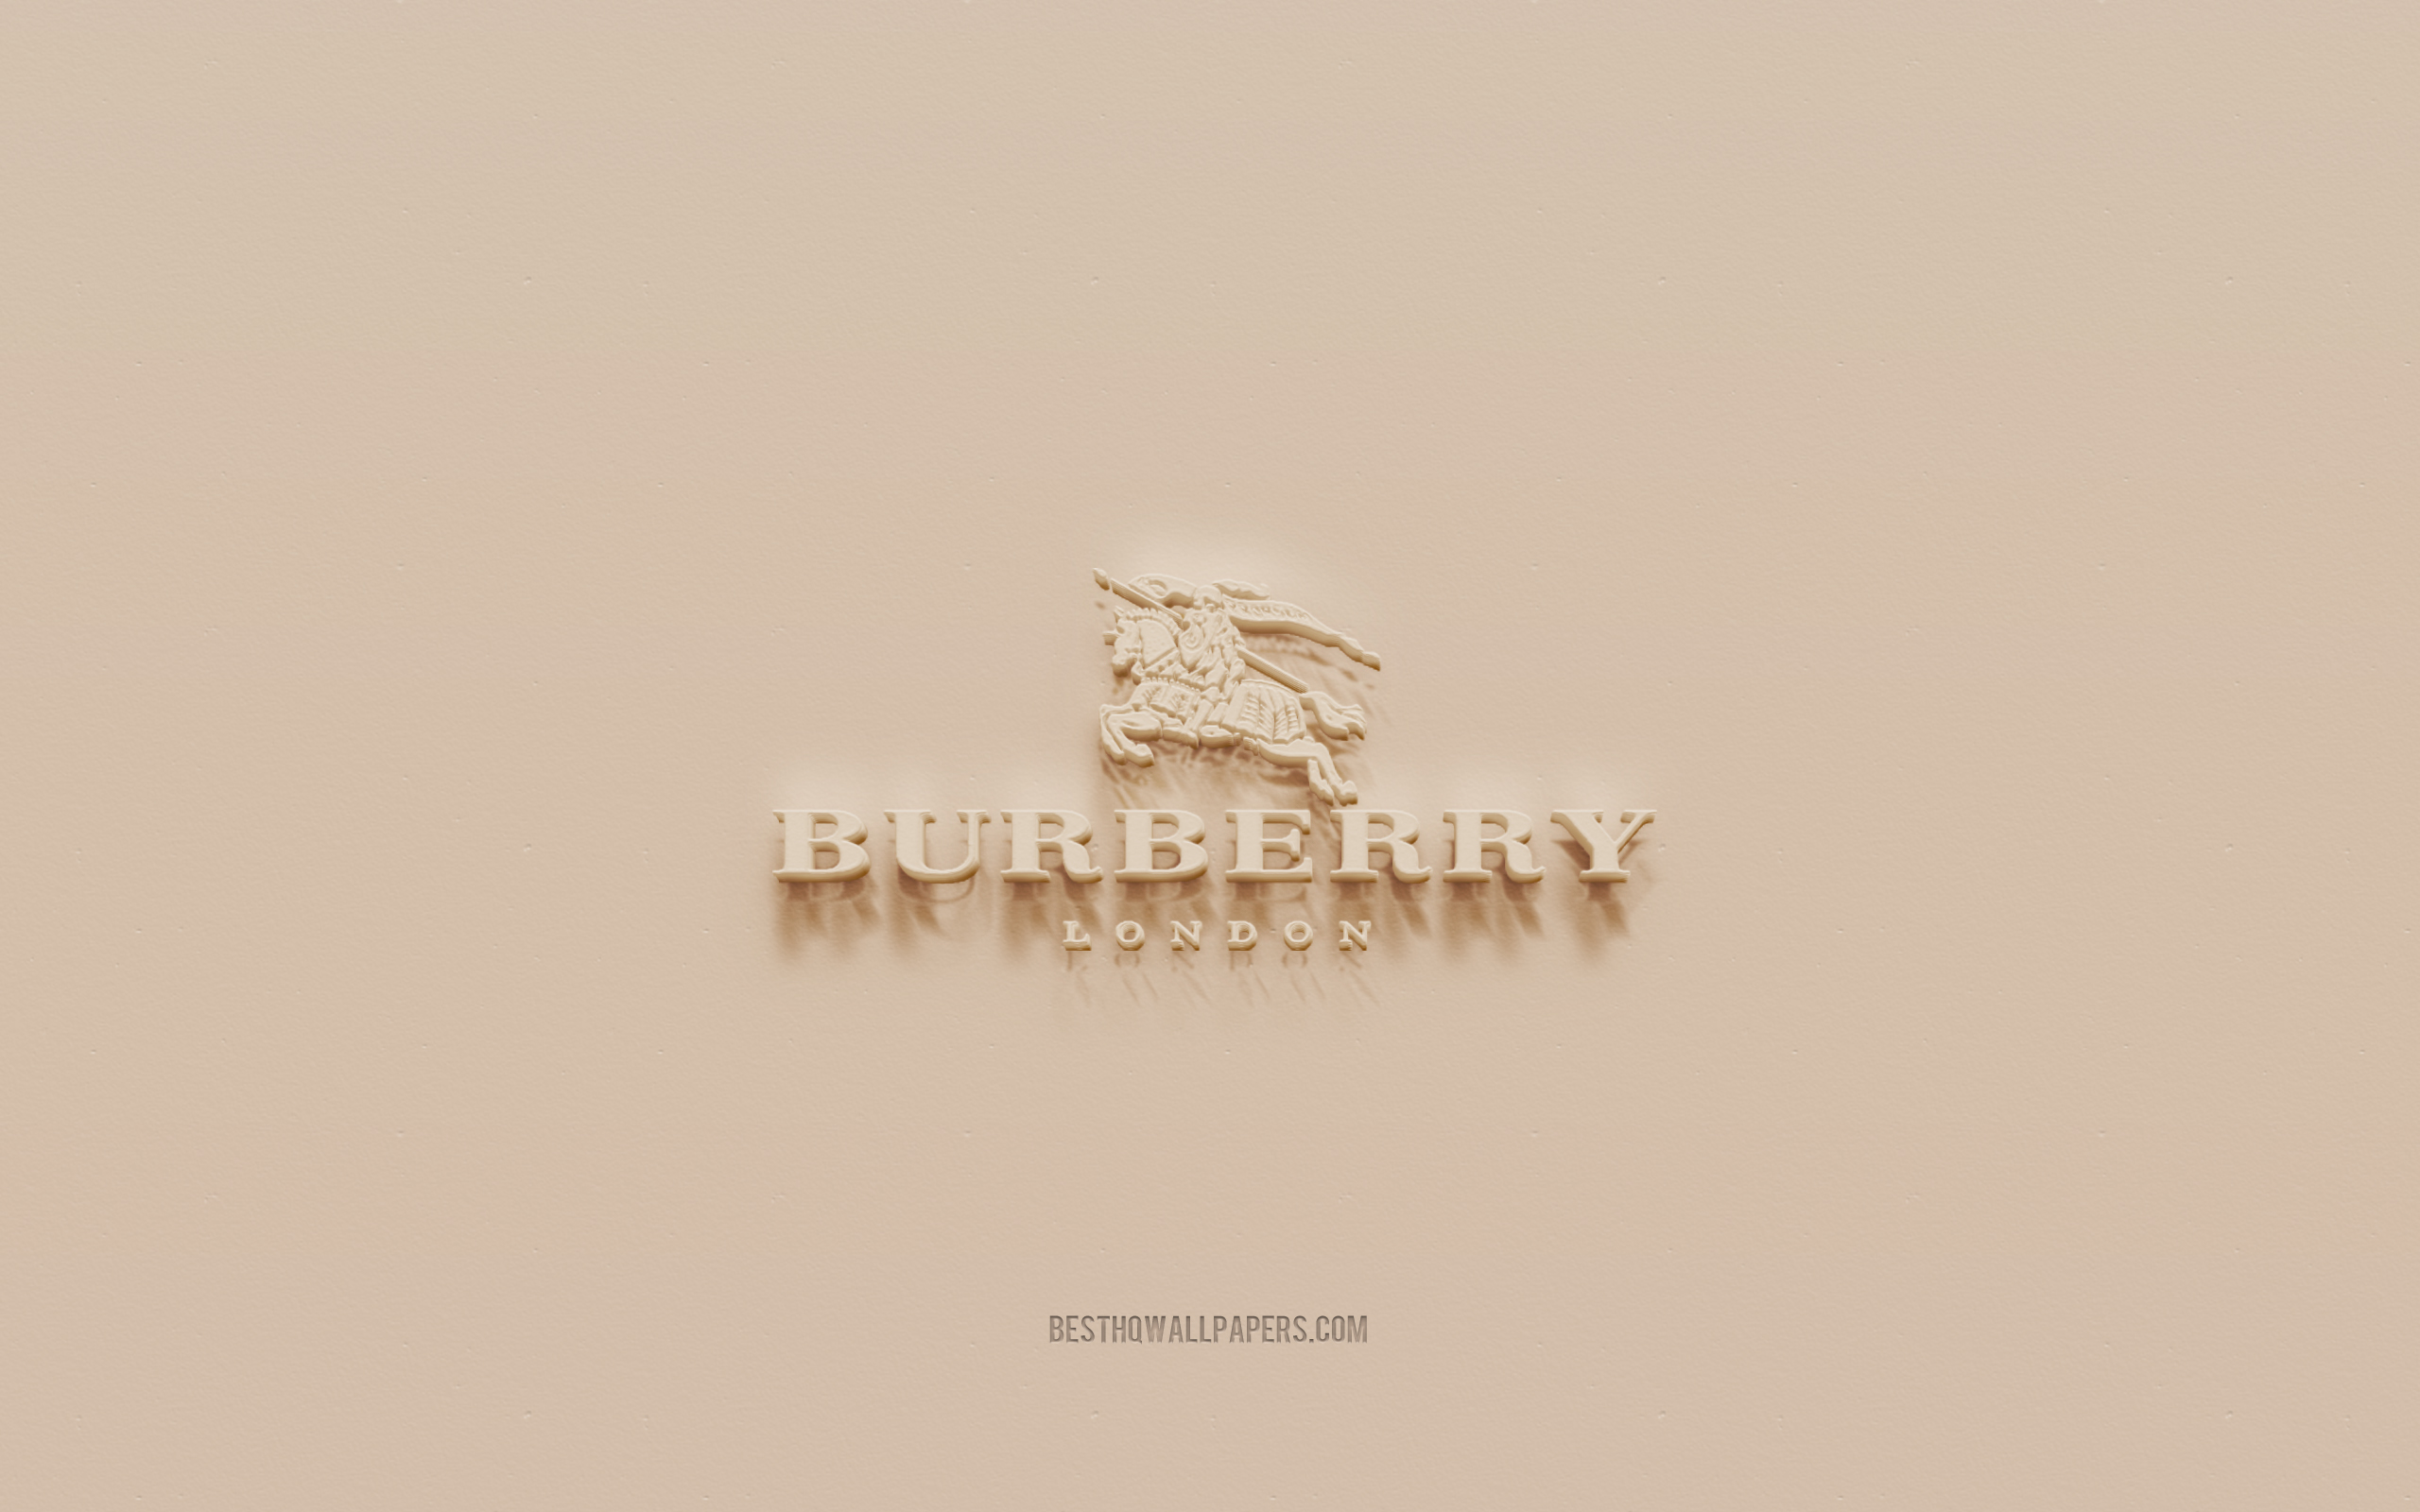 Download wallpapers Burberry logo, brown plaster background, Burberry